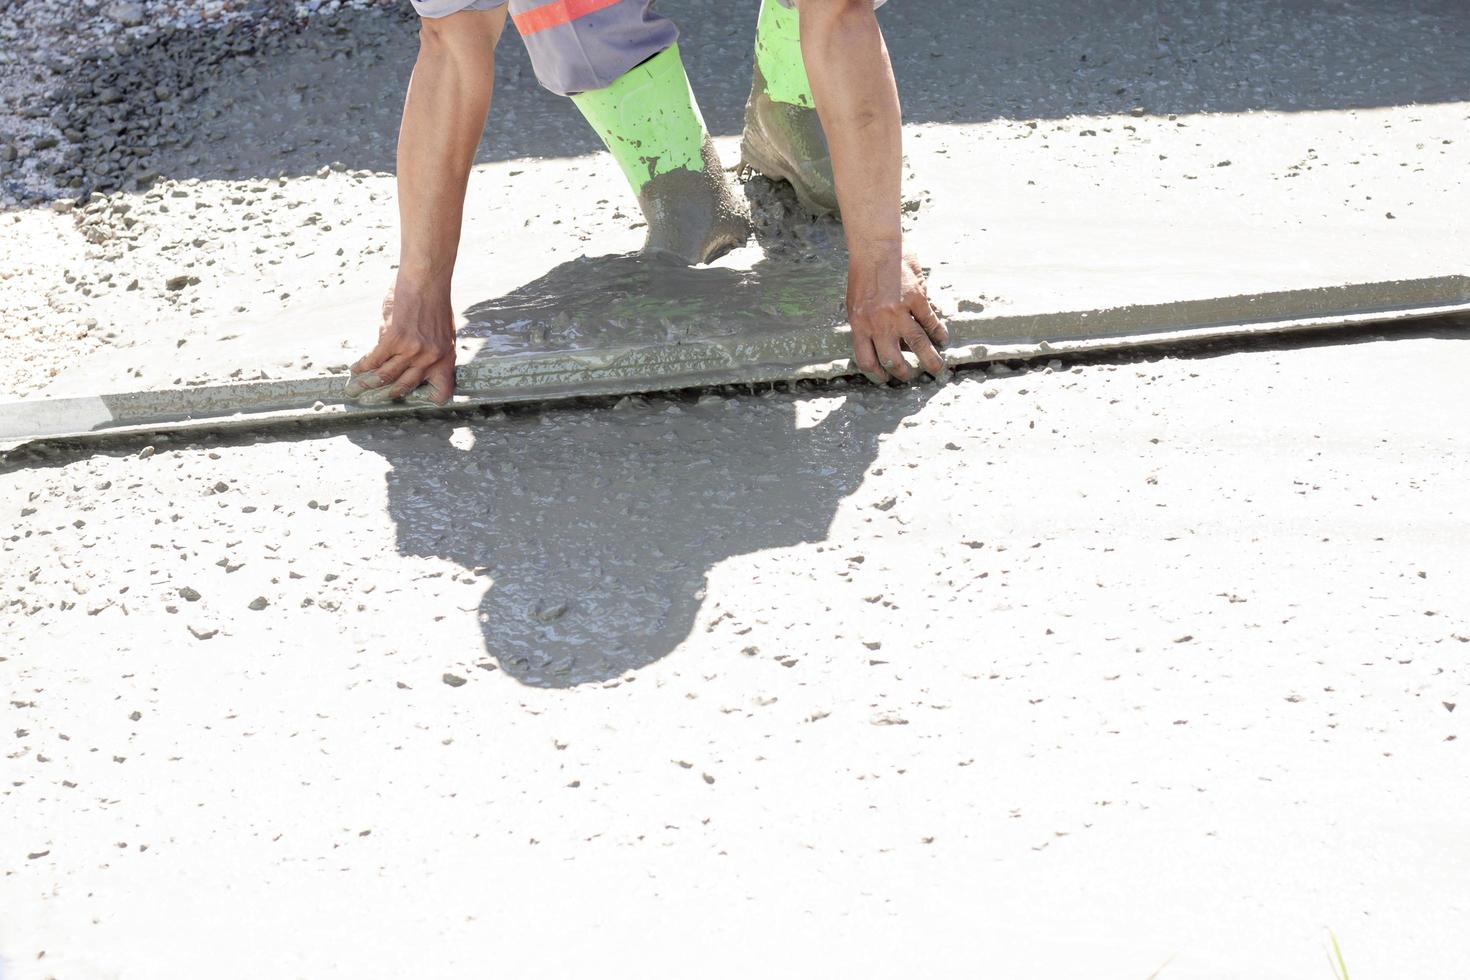 Construction workers are working by leveling the concrete floor smooth in the heat of the sun. photo